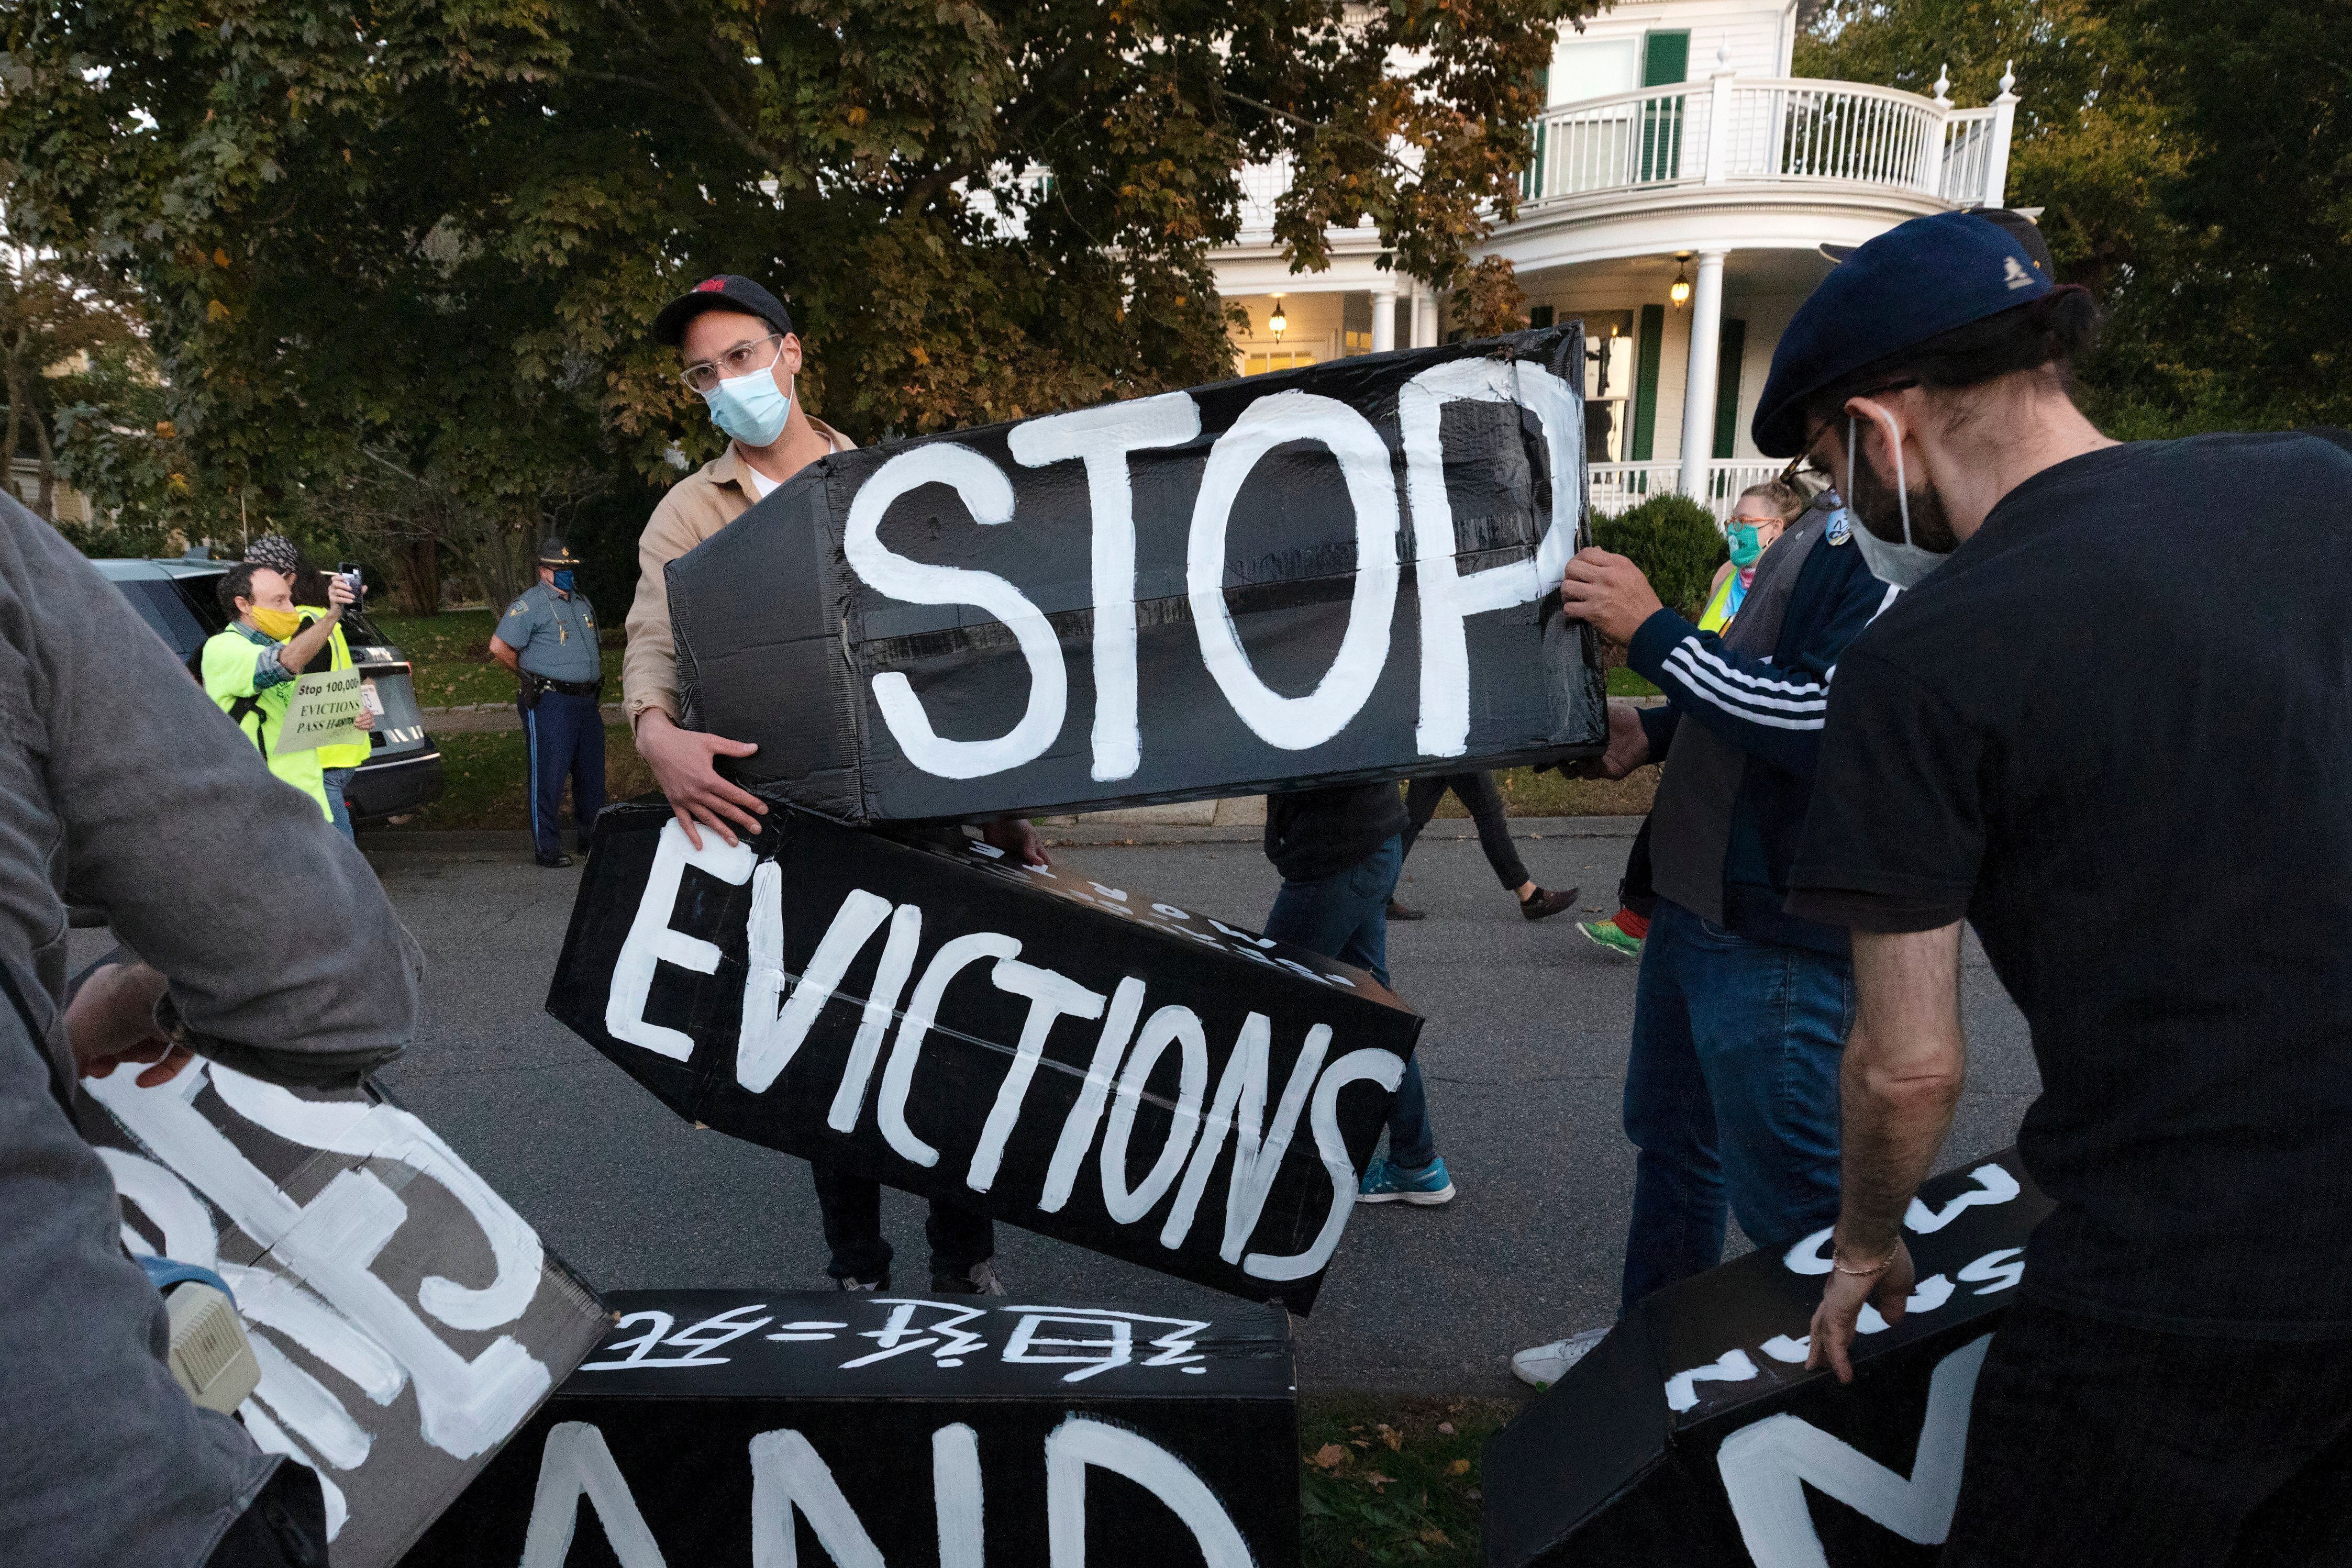 Ministry of Justice appeals judge’s order on eviction moratorium